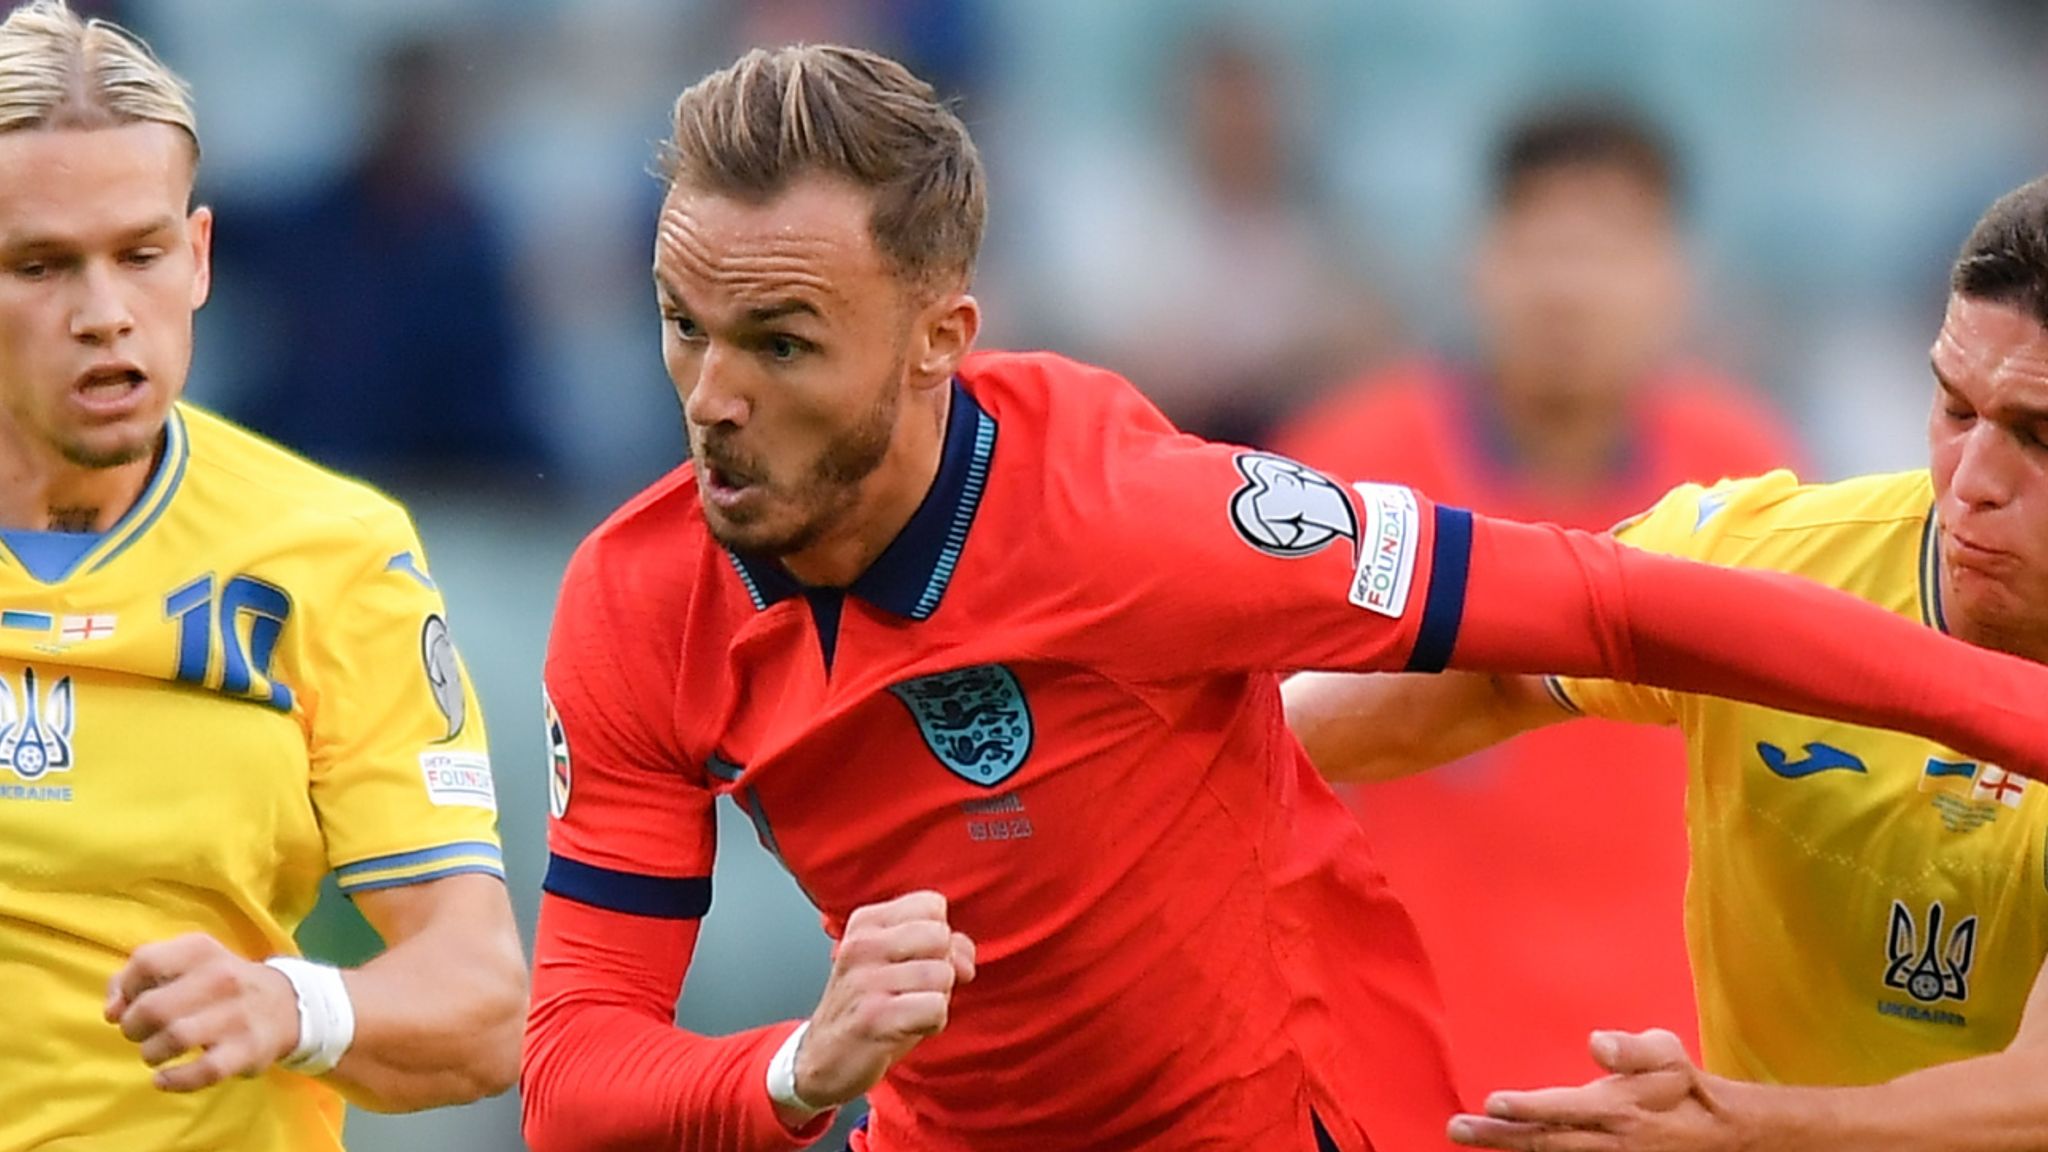 Ukraine 1-1 England Kyle Walker off the mark, Phil Foden spurns his chance but James Maddison offers promise Football News Sky Sports